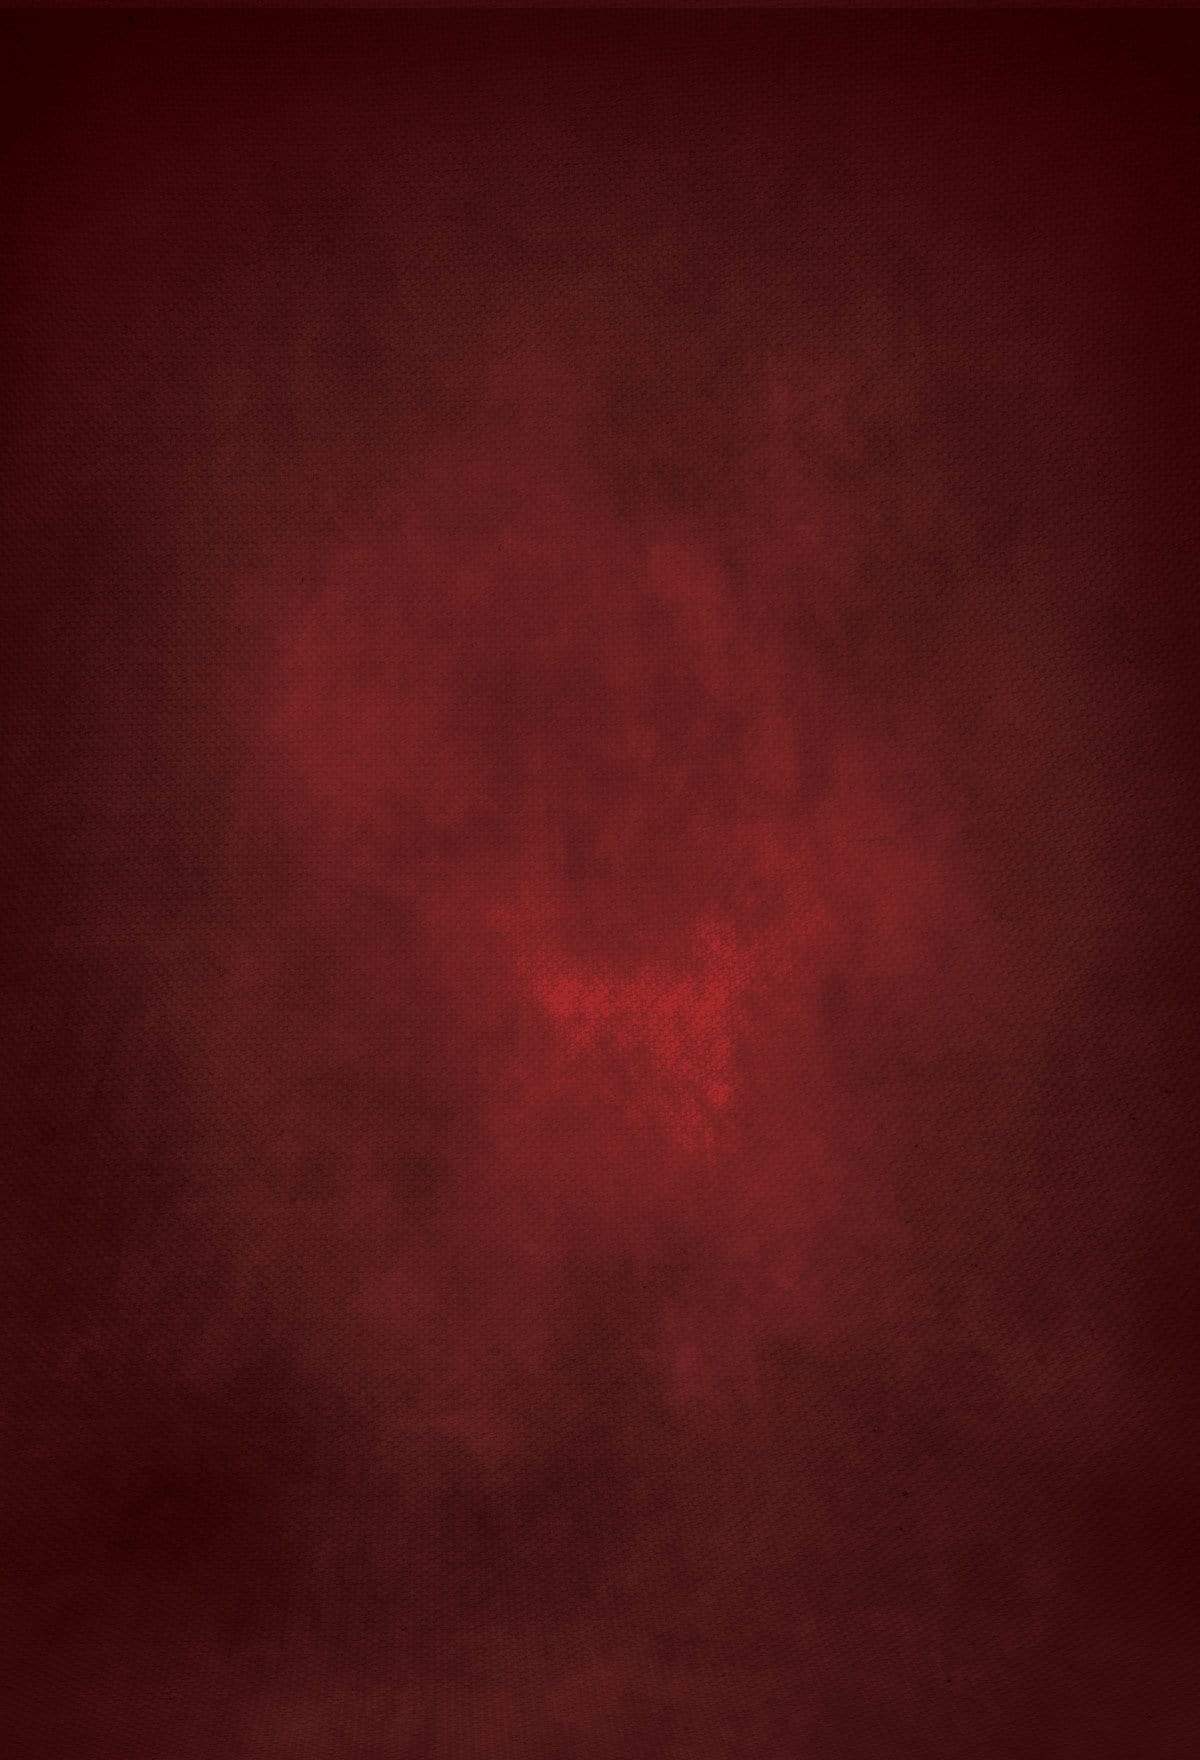 Katebackdrop£ºKate Dark Red Wine Color Abstract Weave Pattern Texture Backdrop Designed by JFCC